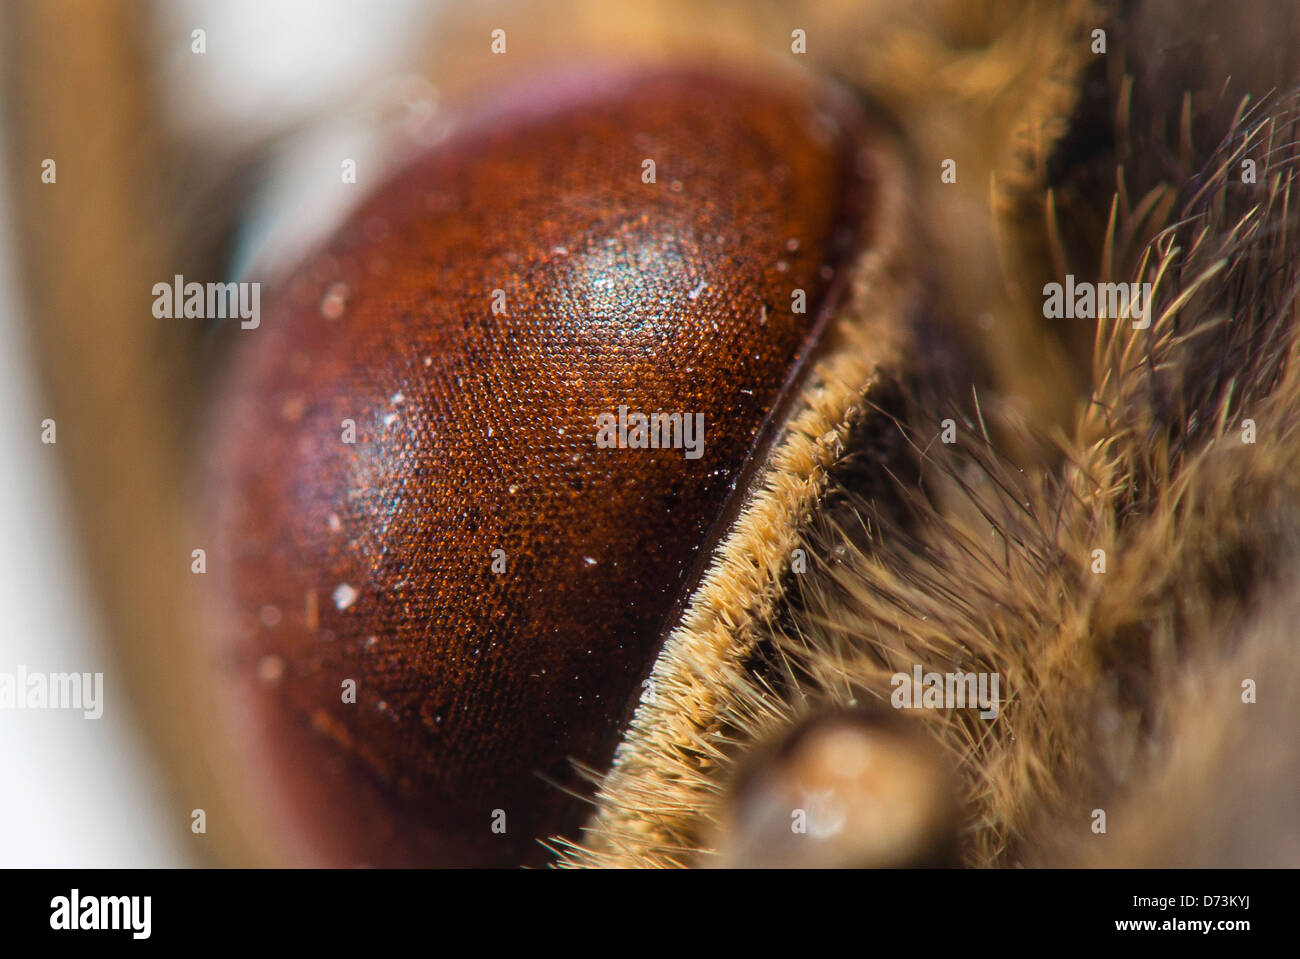 The compound eye of a butterfly Stock Photo